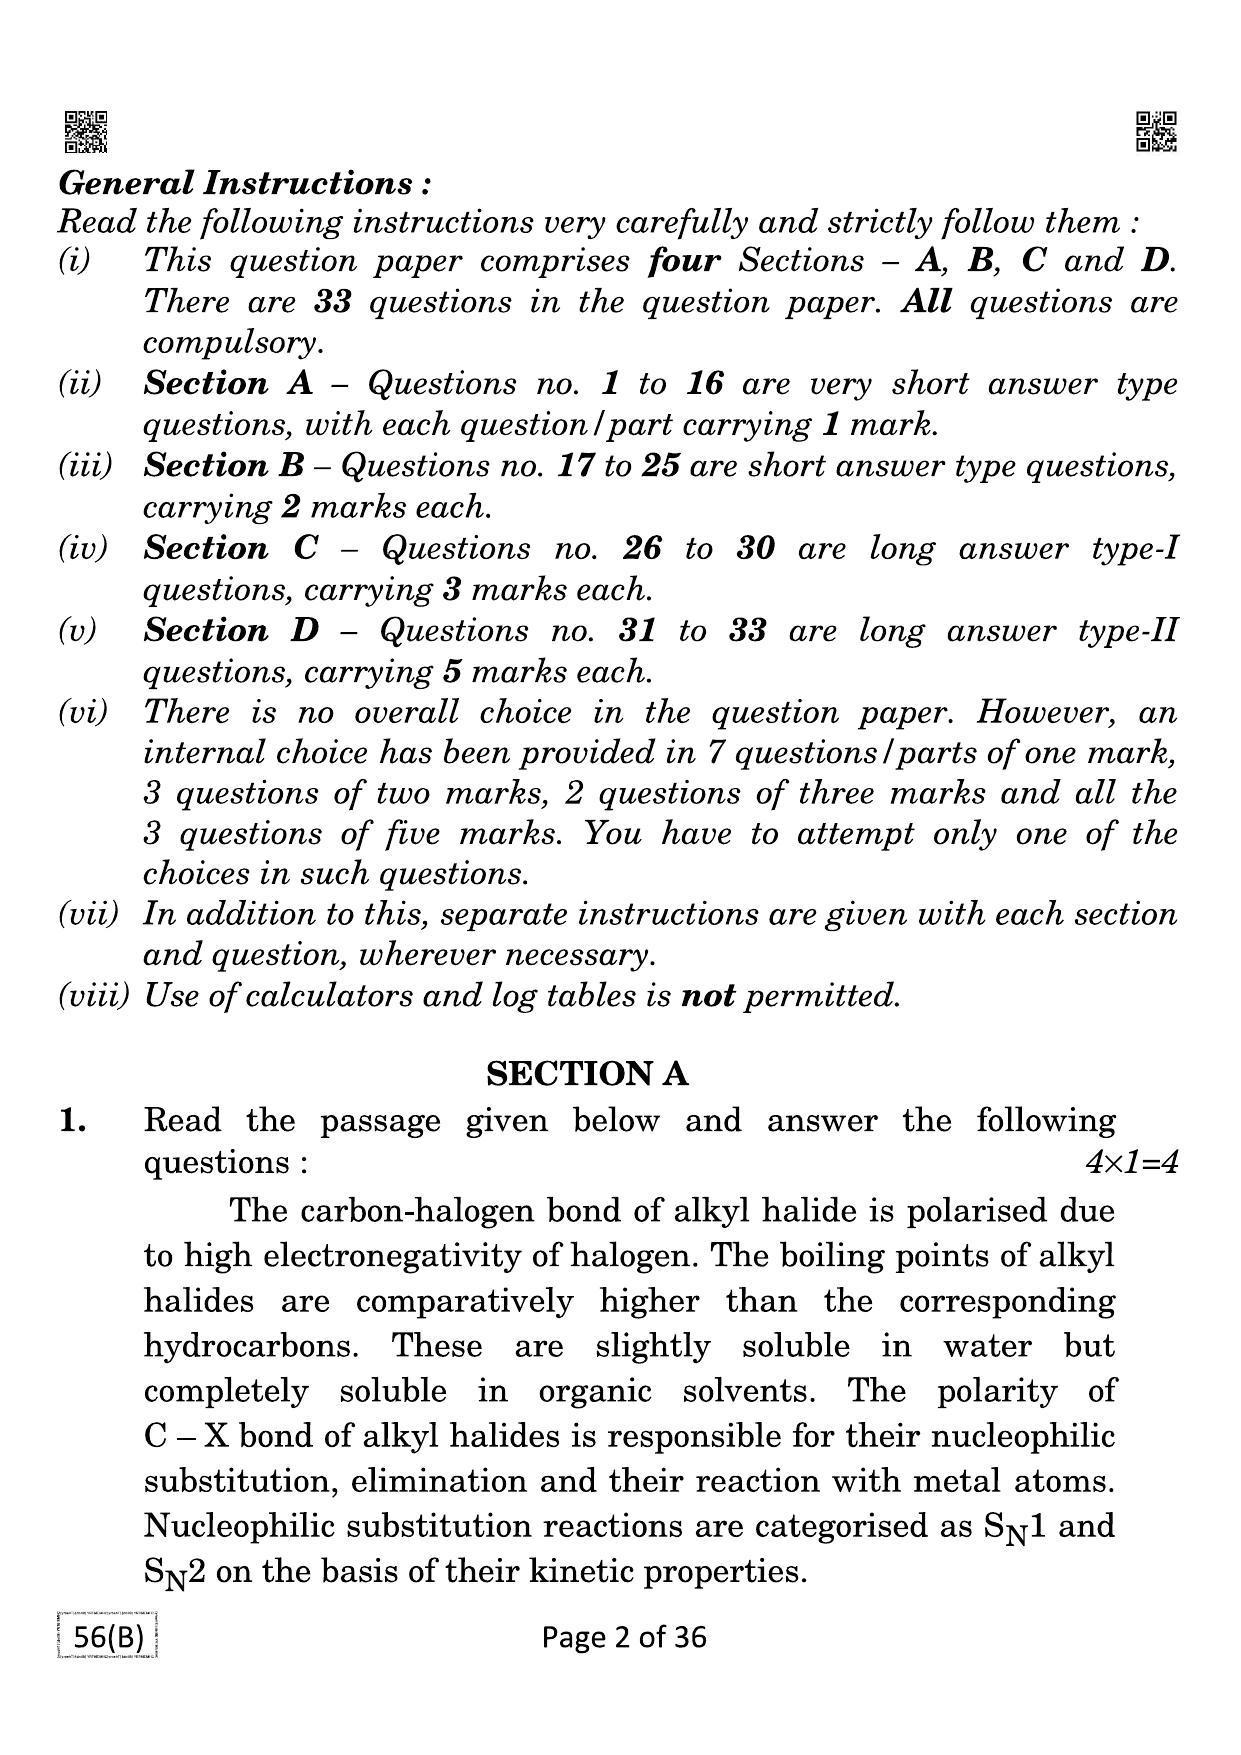 CBSE Class 12 QP_043_CHEMISTRY_FOR_BLIND_CANDIDATES 2021 Compartment Question Paper - Page 2